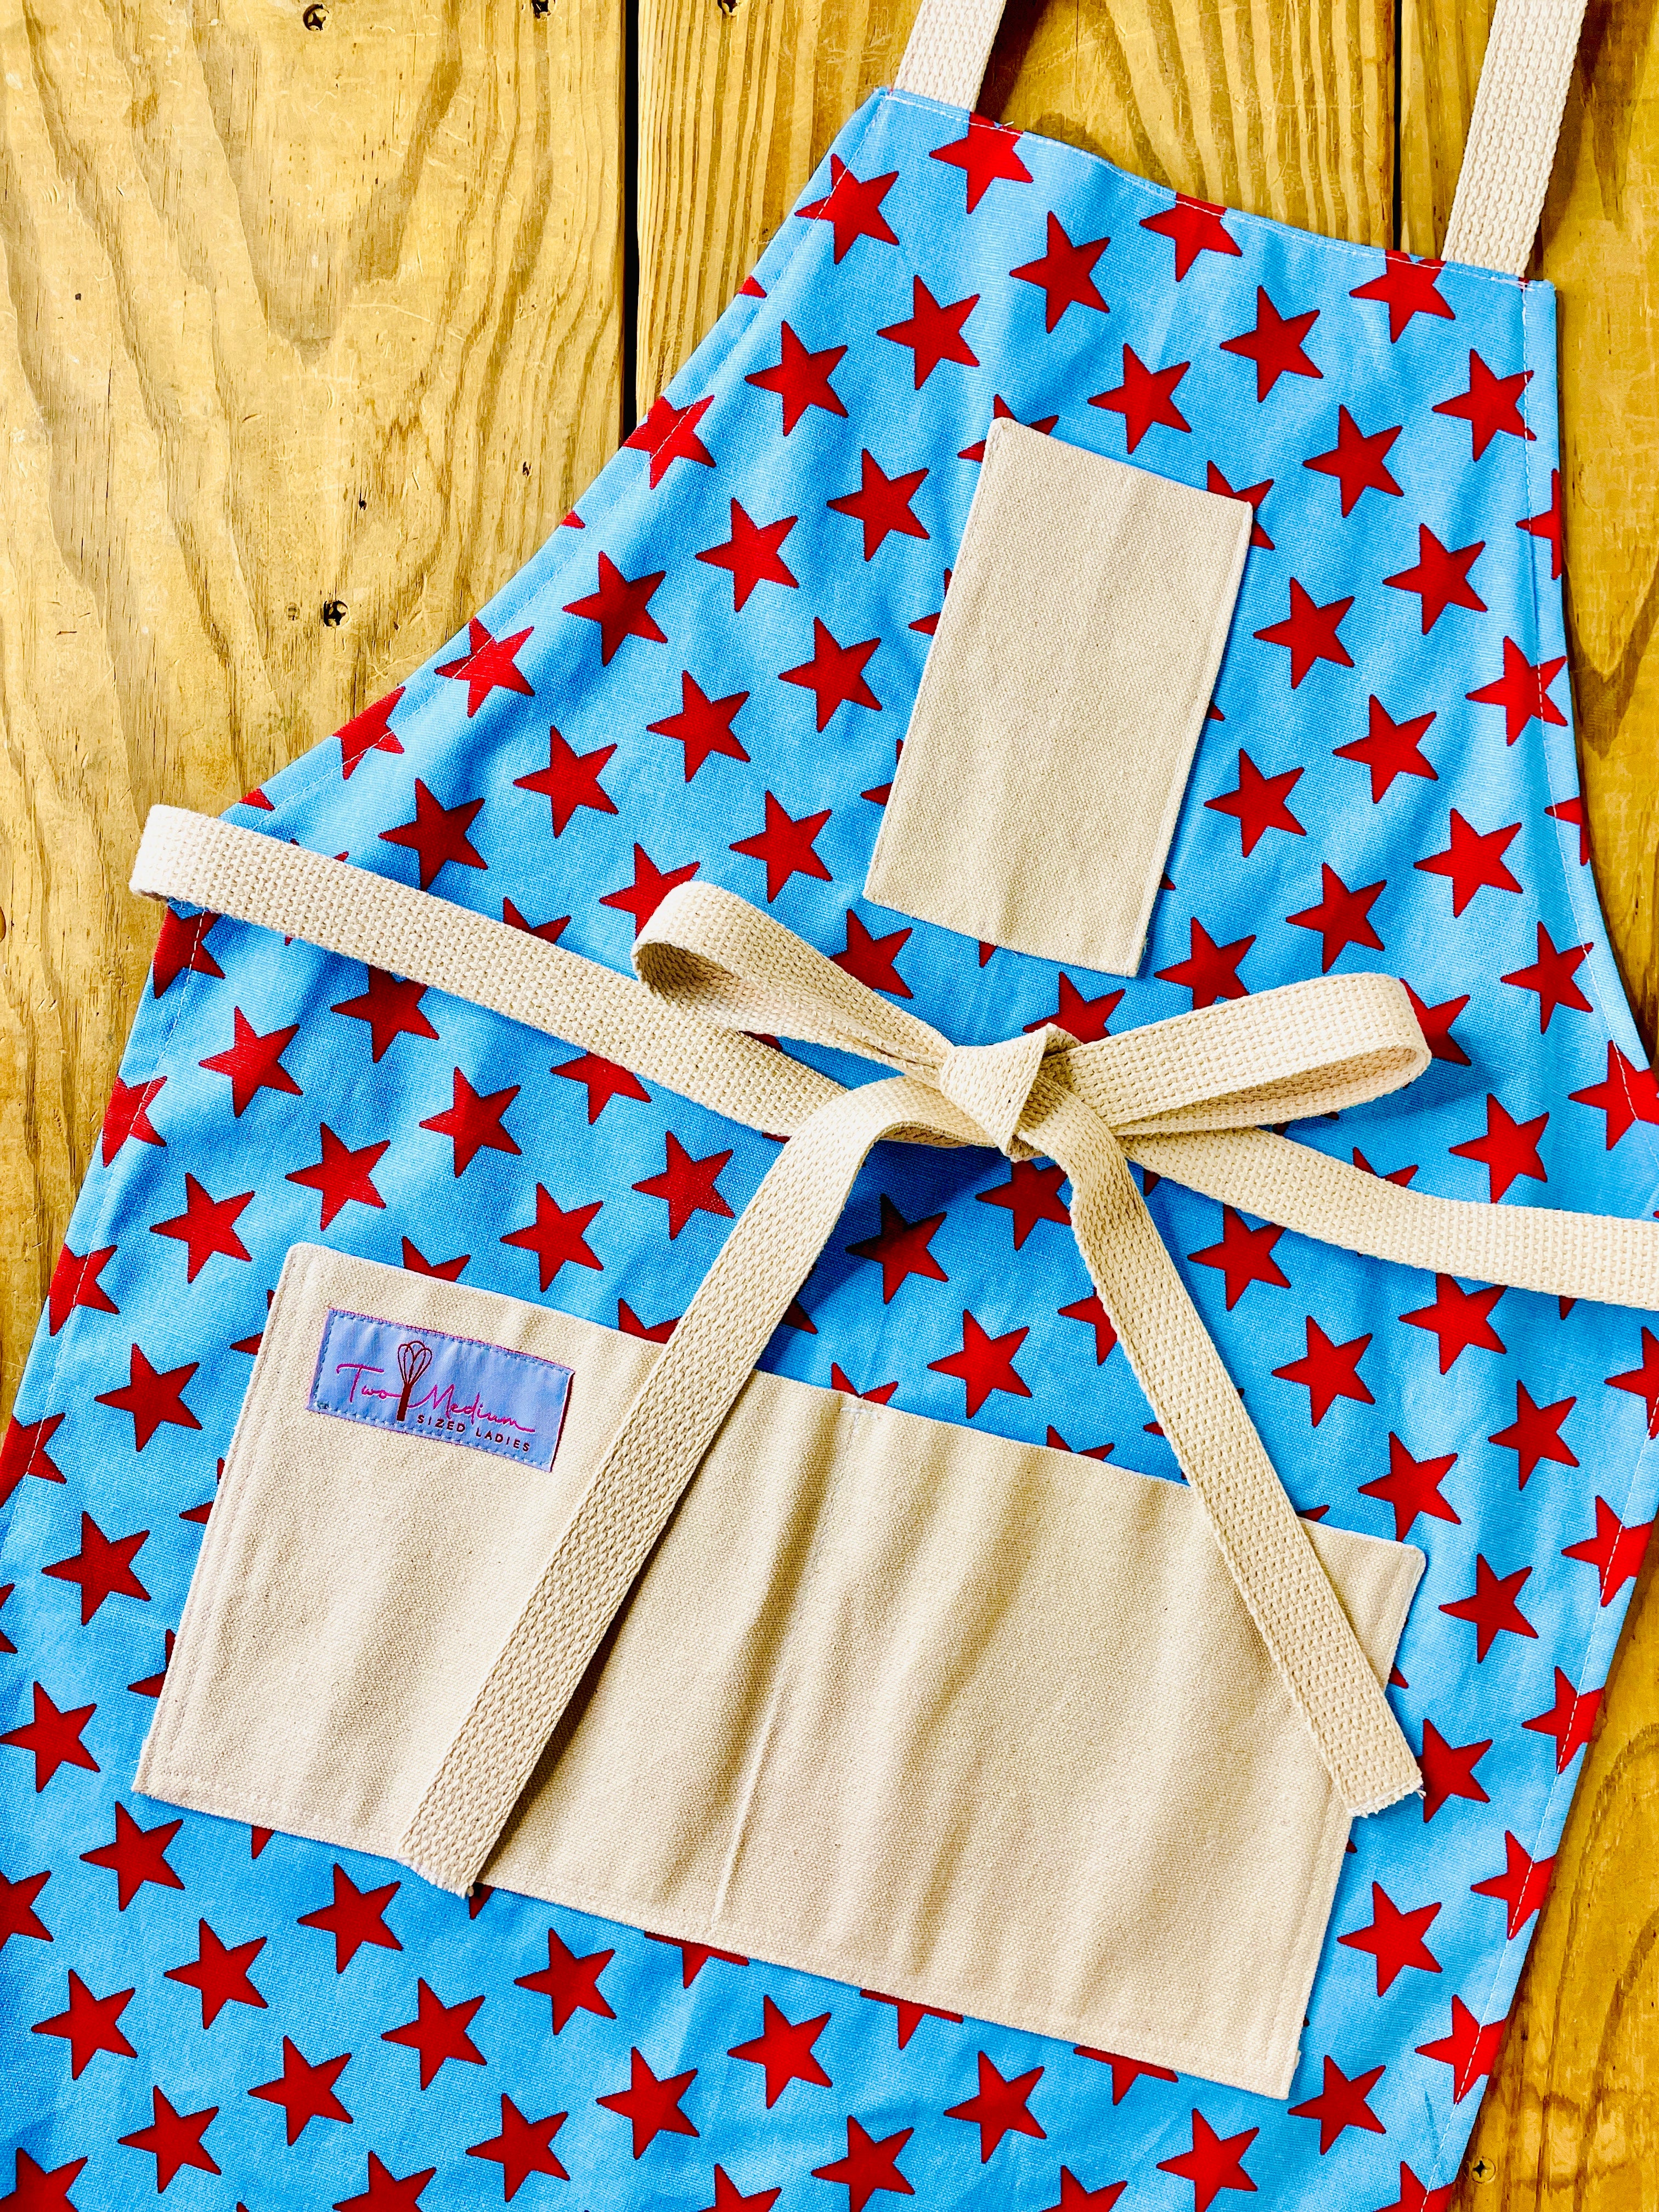 Ranchy Life Betsy Apron patriotic red white and blue stars American style by Two Medium Sized Ladies